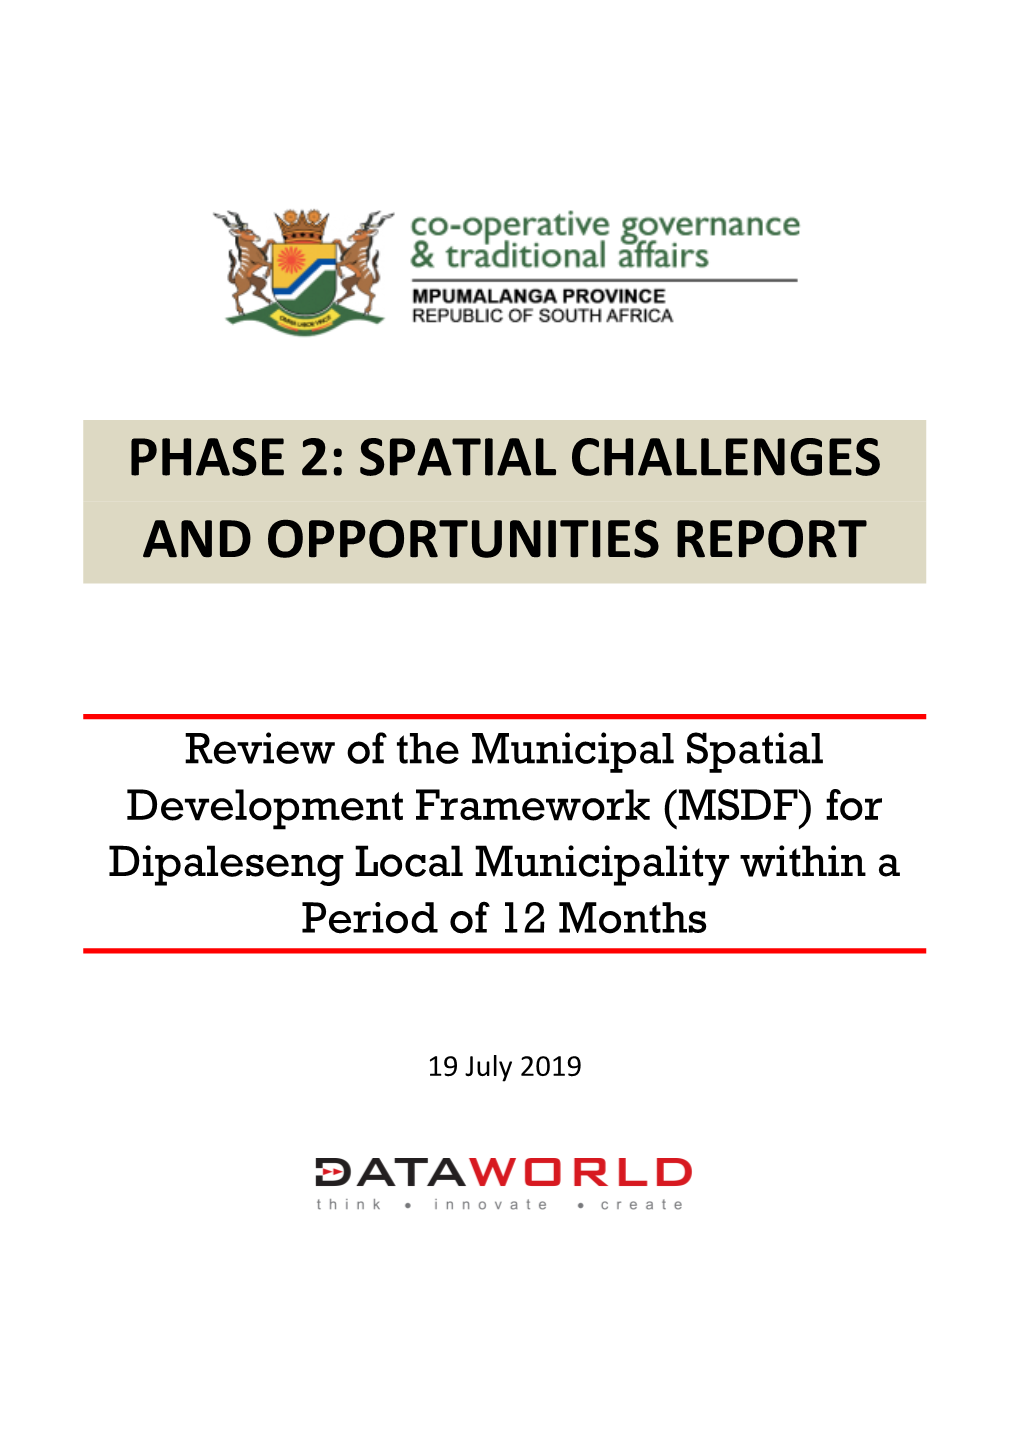 Dipaleseng Local Municipality Within a Period of 12 Months